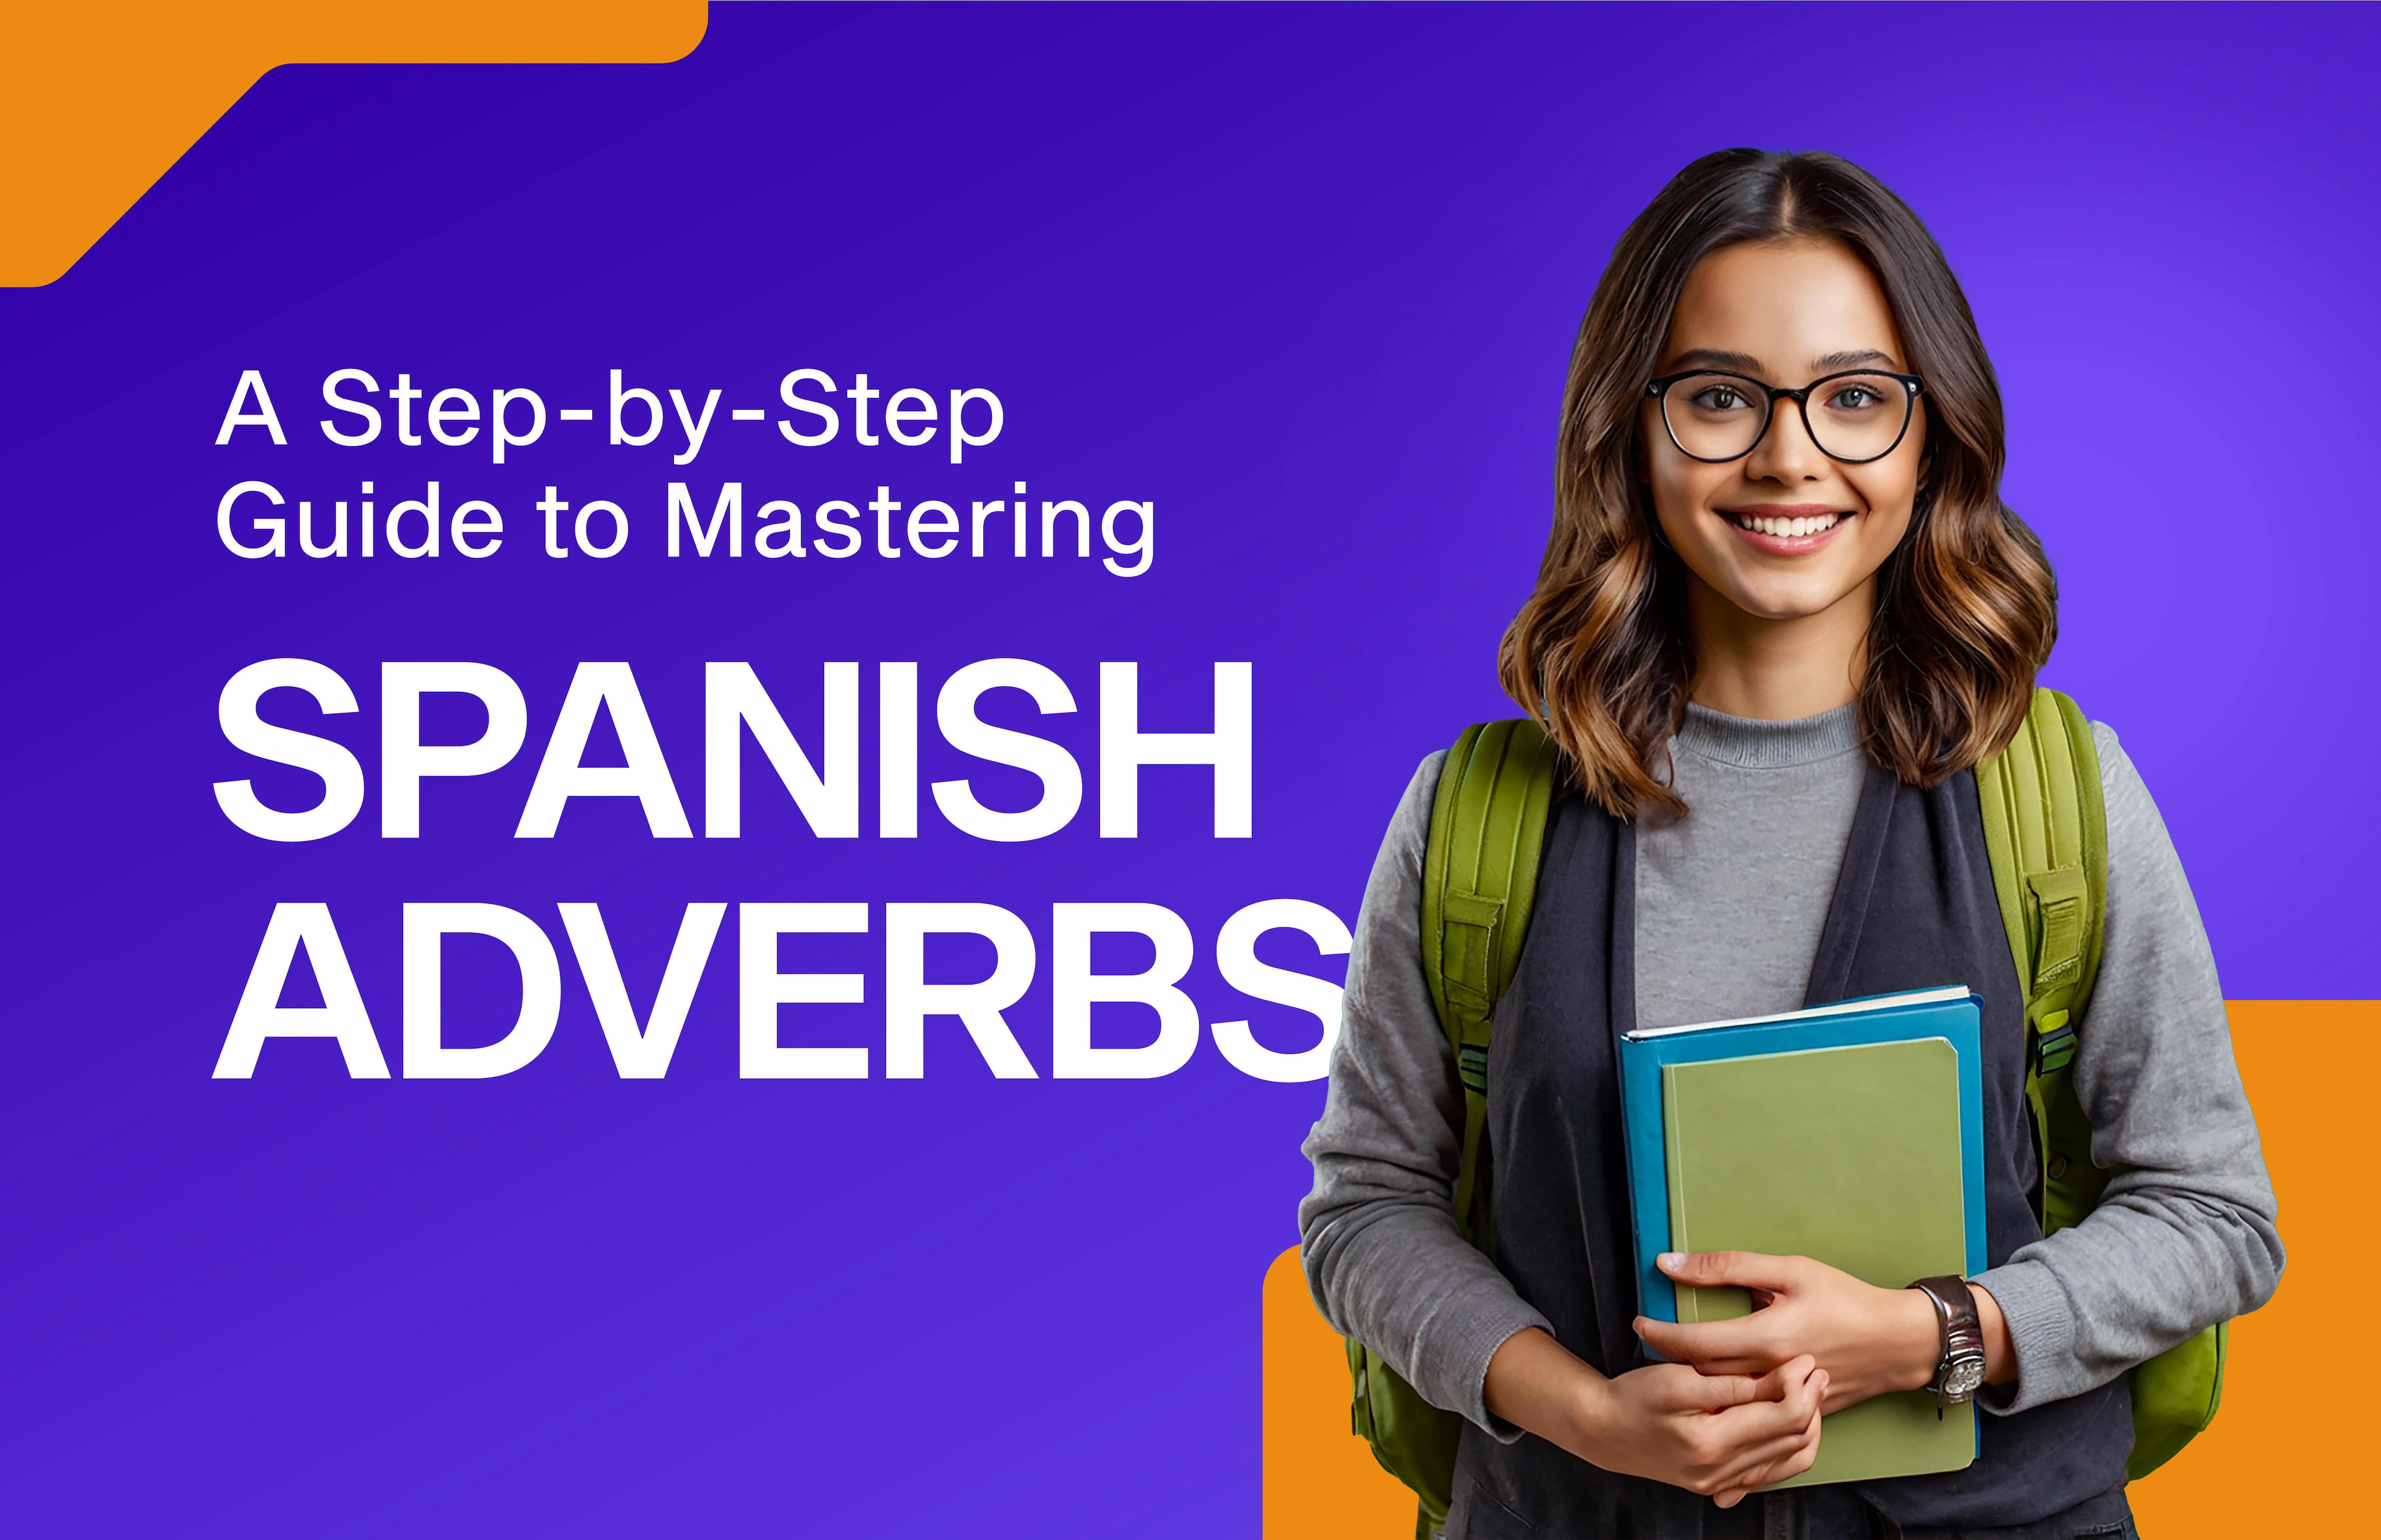 Los Adverbios: A Complete Guide for Spanish Adverbs